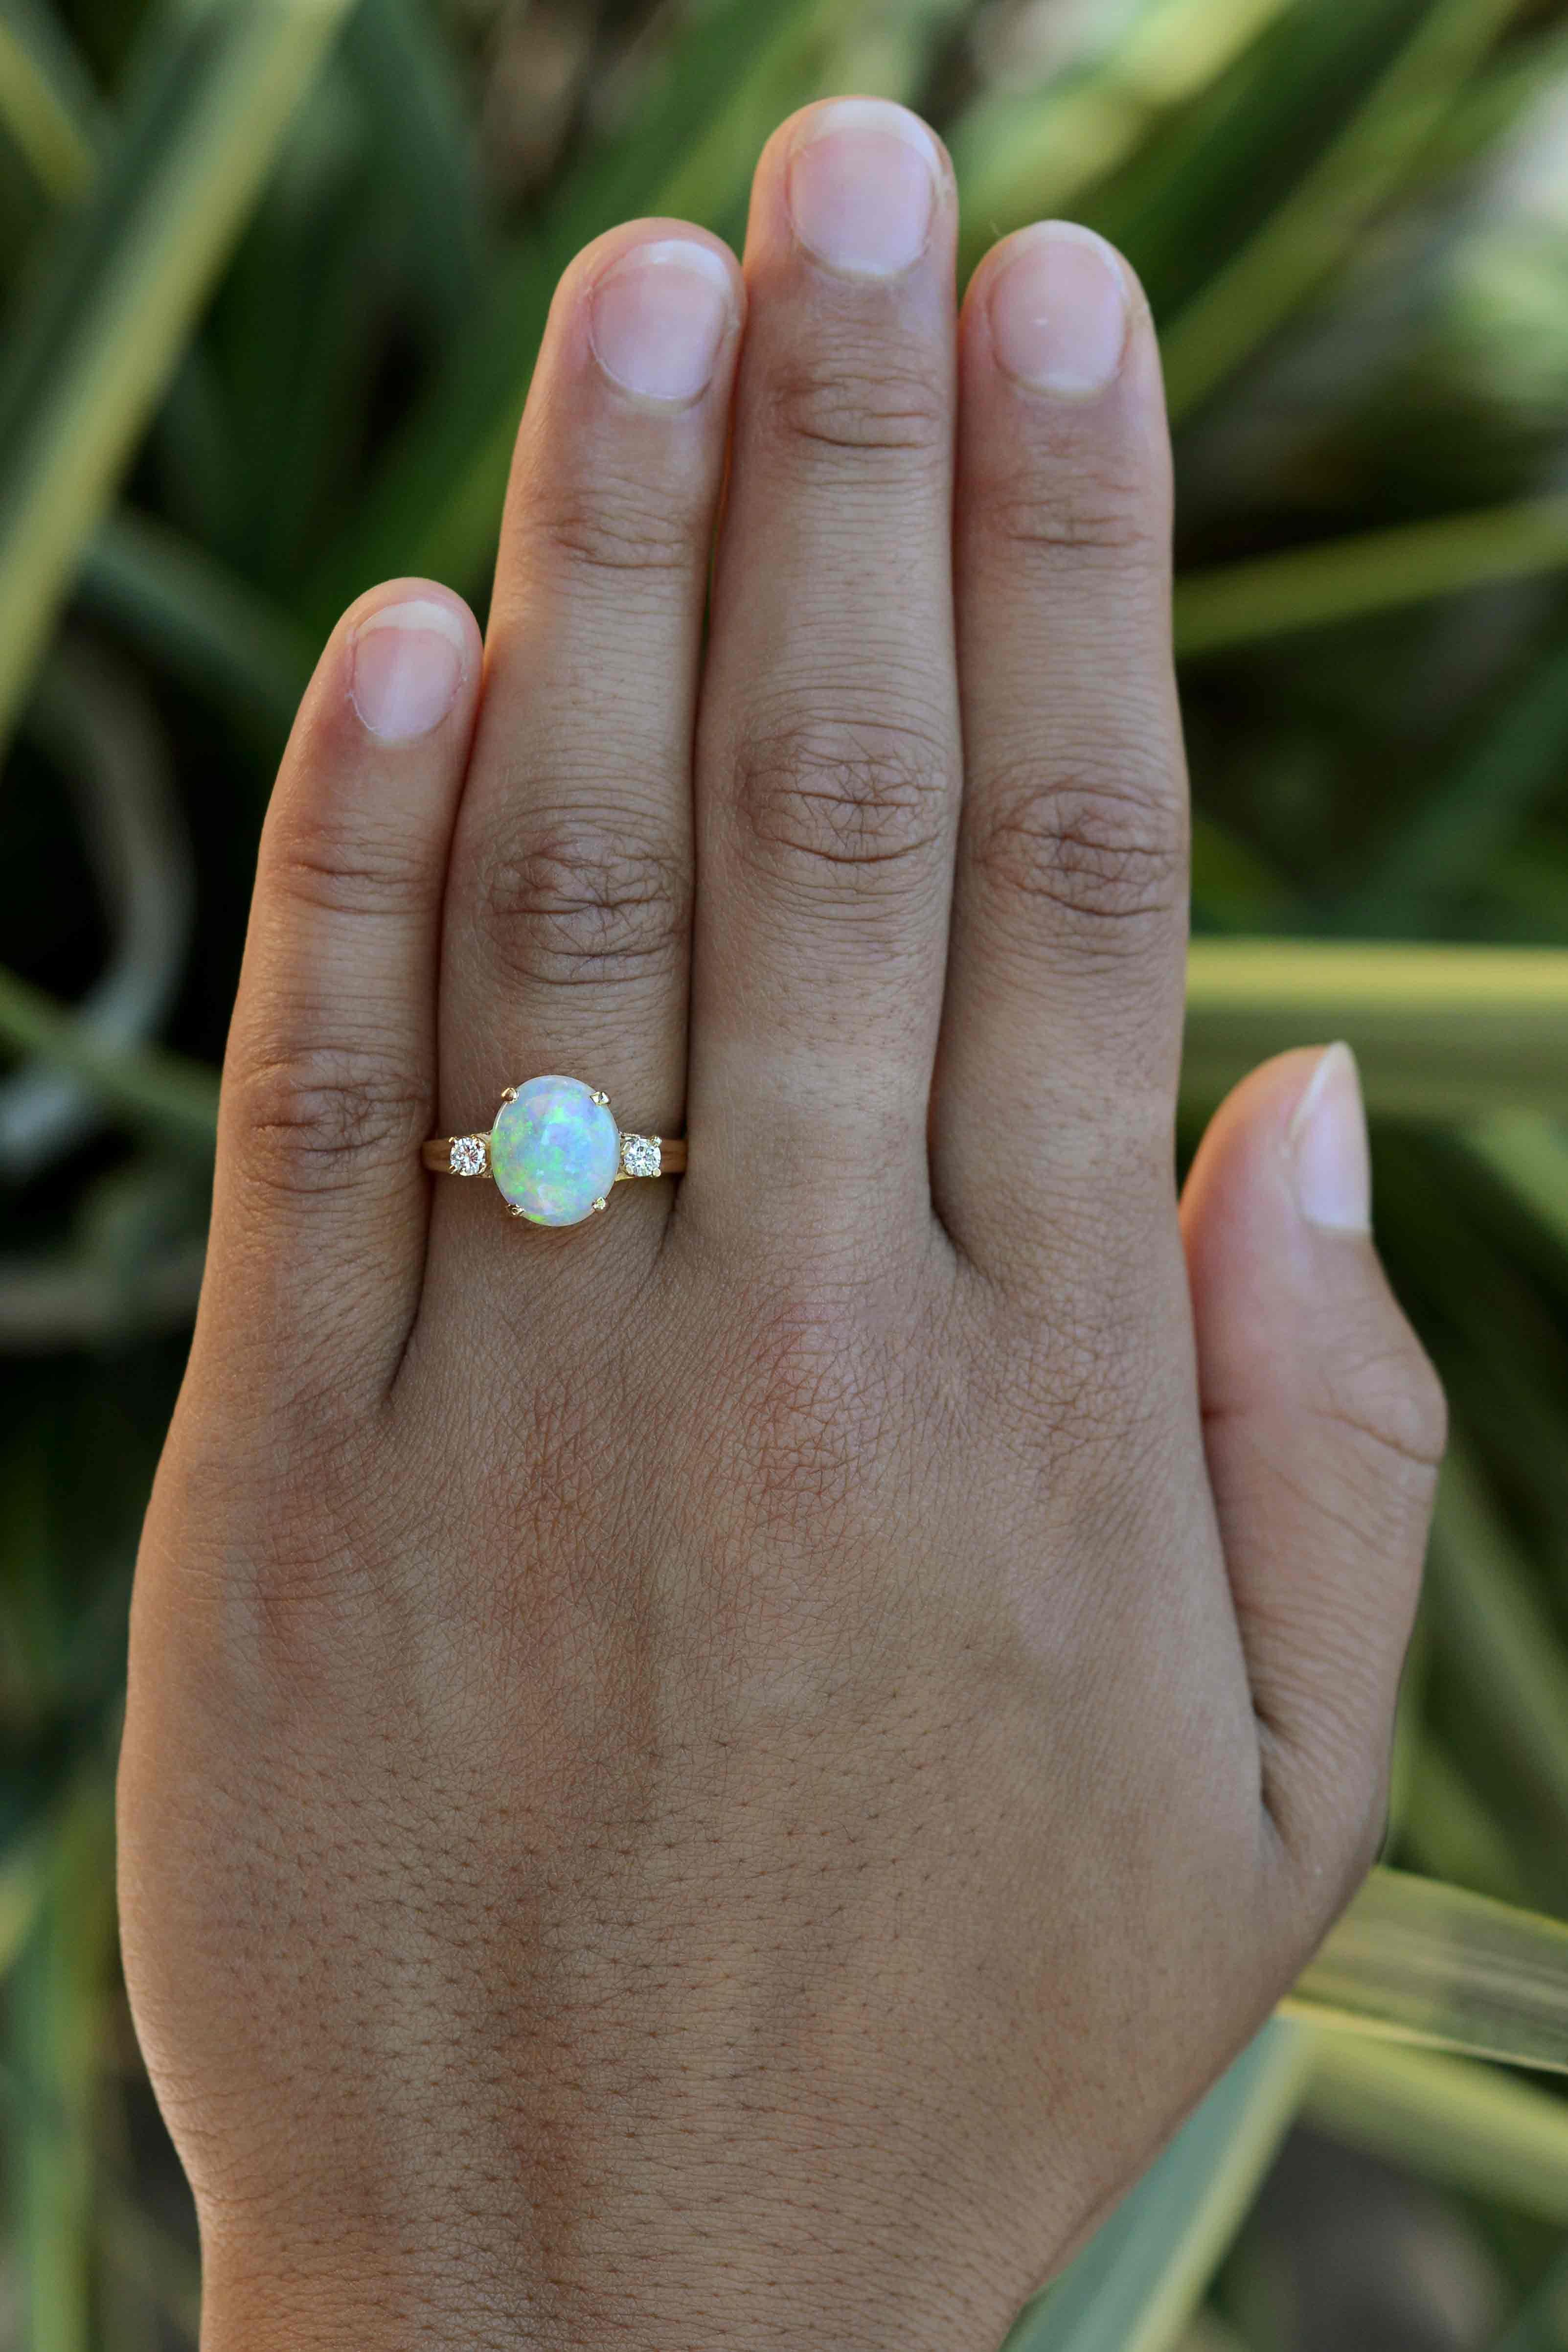 You'll enjoy this classic, vintage Tiffany 3 stone opal and diamond engagement ring for generations to come. The simple, Mid Century trinity or trilogy design can be worn as a bridal jewel, birthstone or statement ring. Centering on a kaleidoscopic